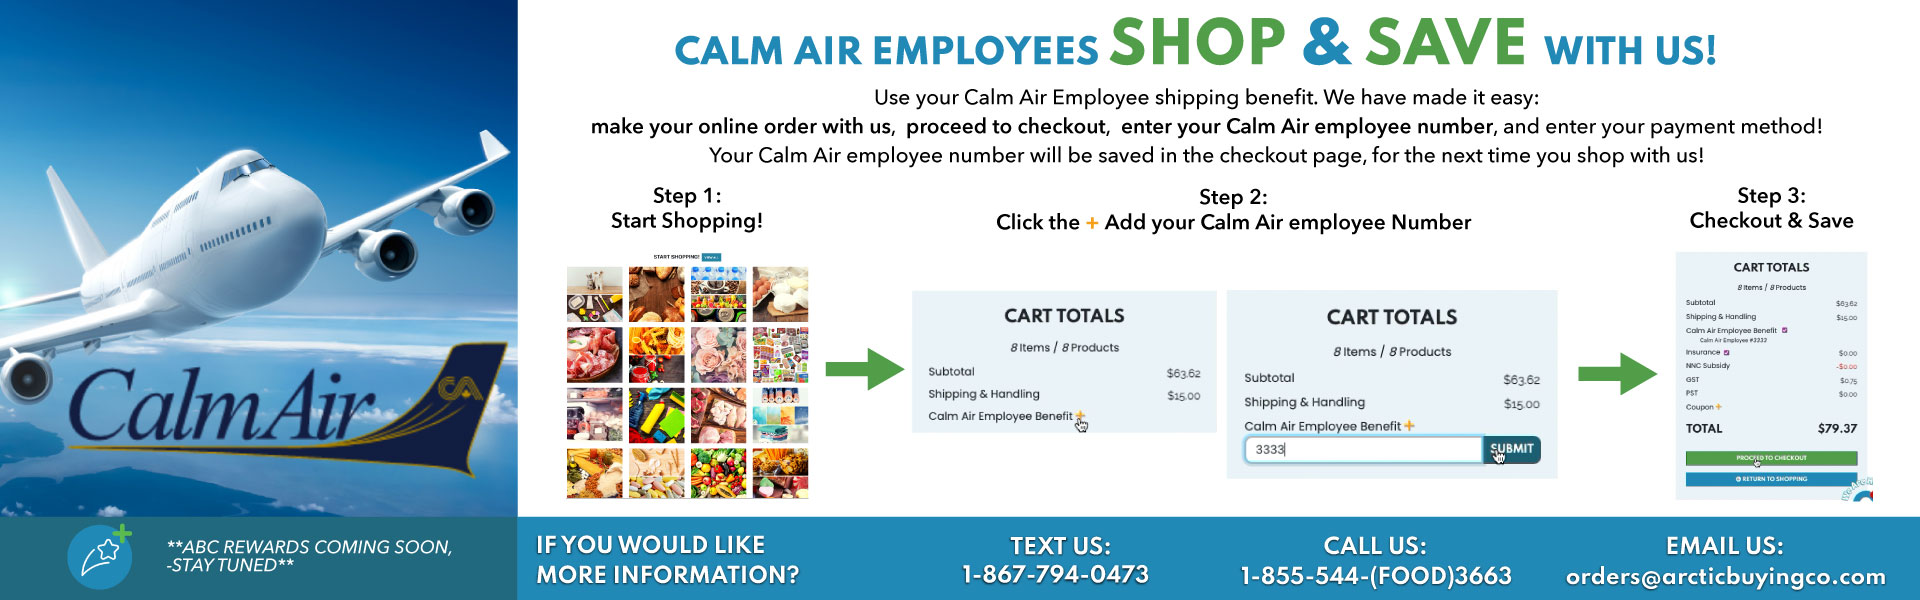 Calm Air Employees Shop & Save With US.